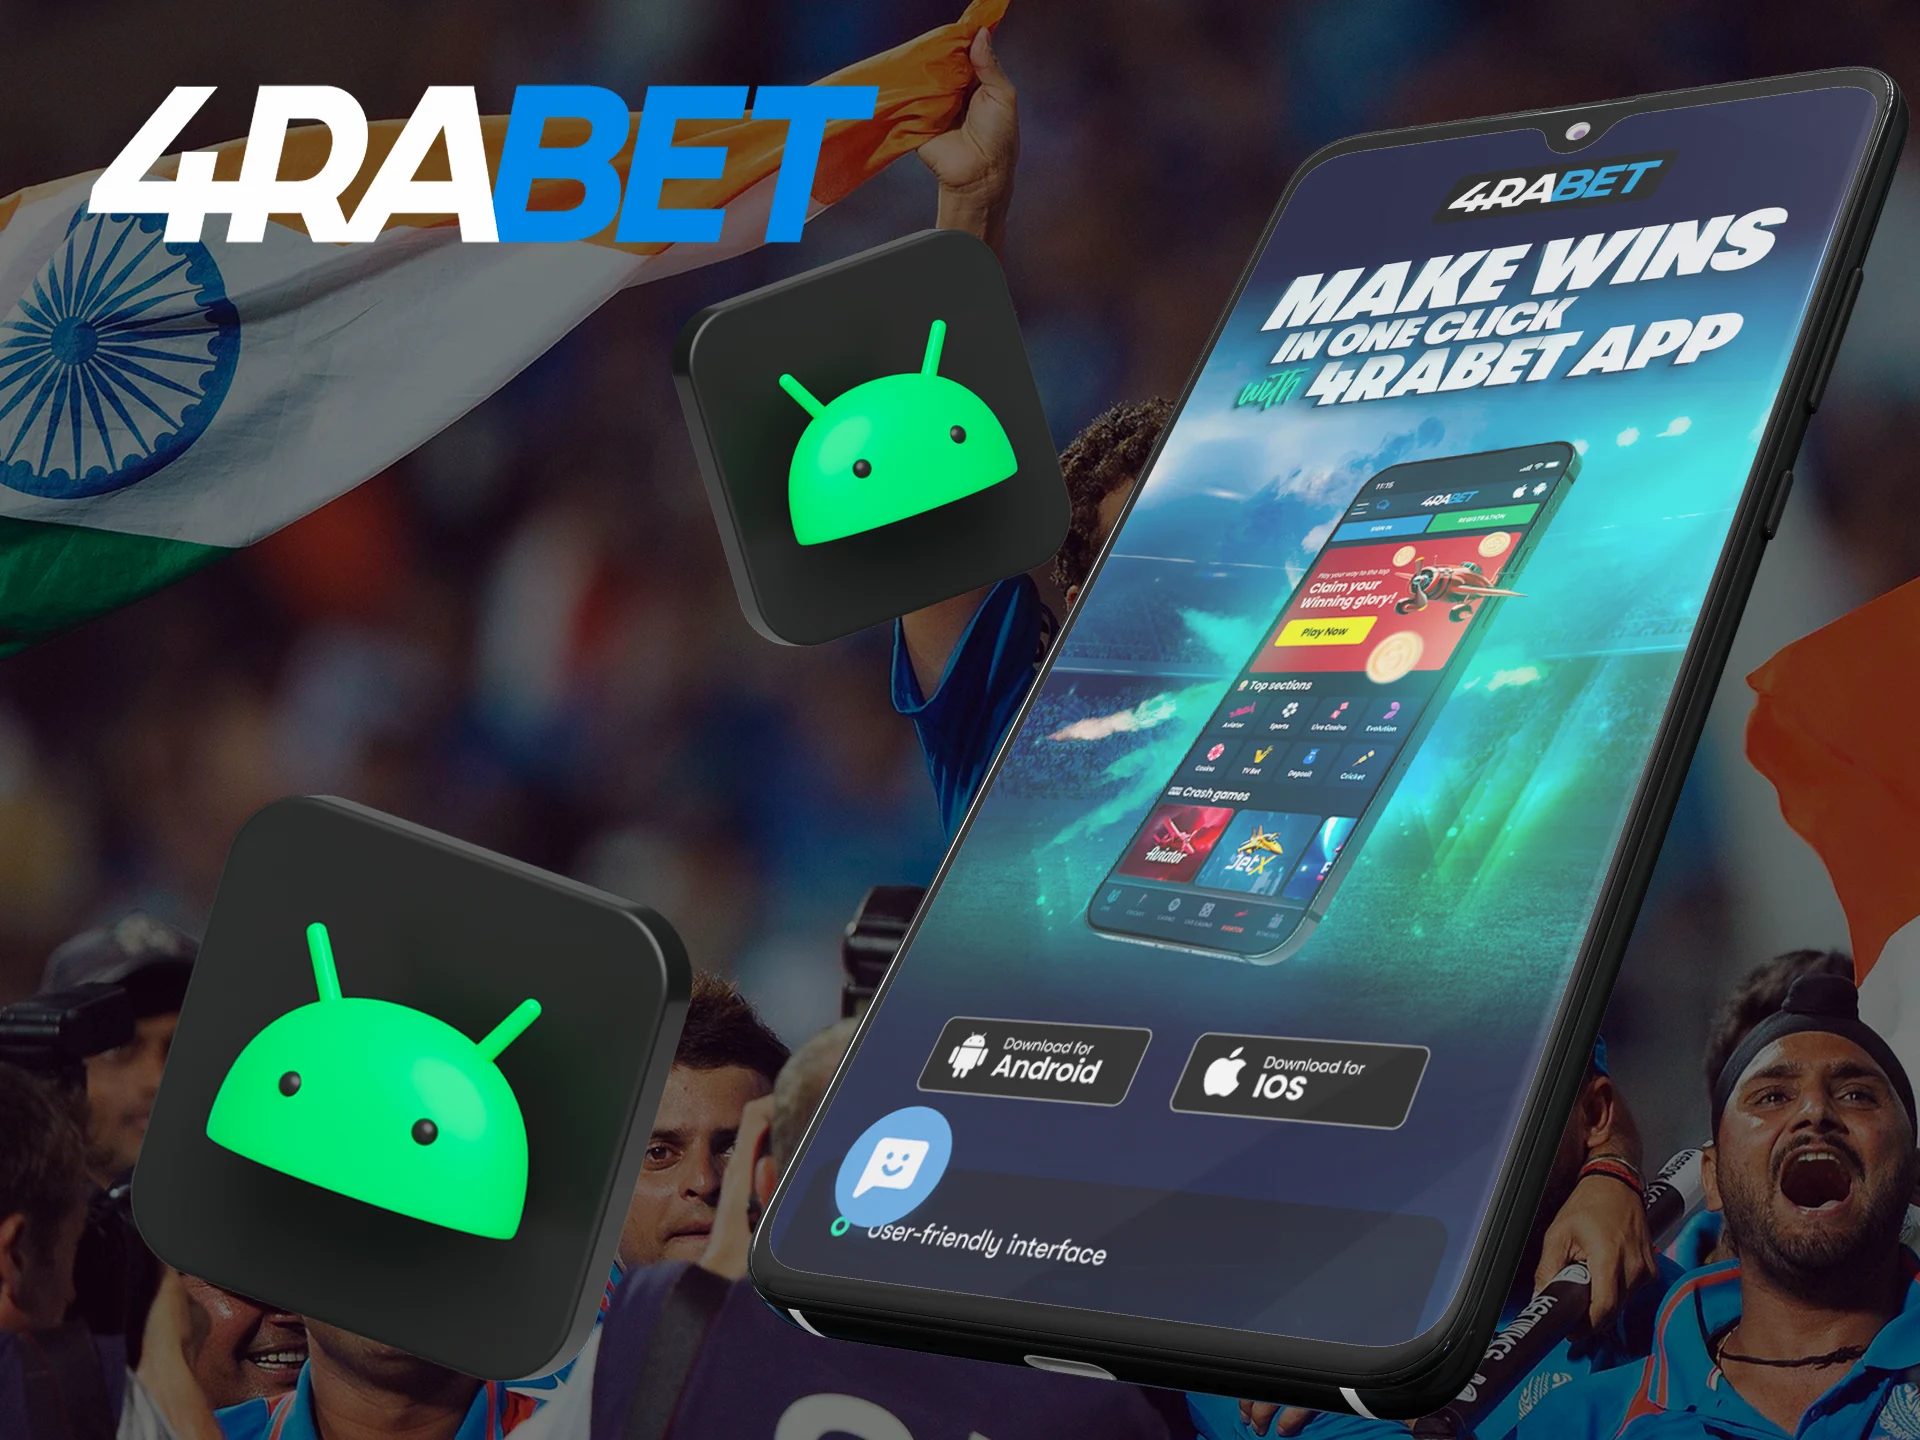 Start using the 4Rabet betting application for Android devices, which will allow you to place bets anywhere and anytime.